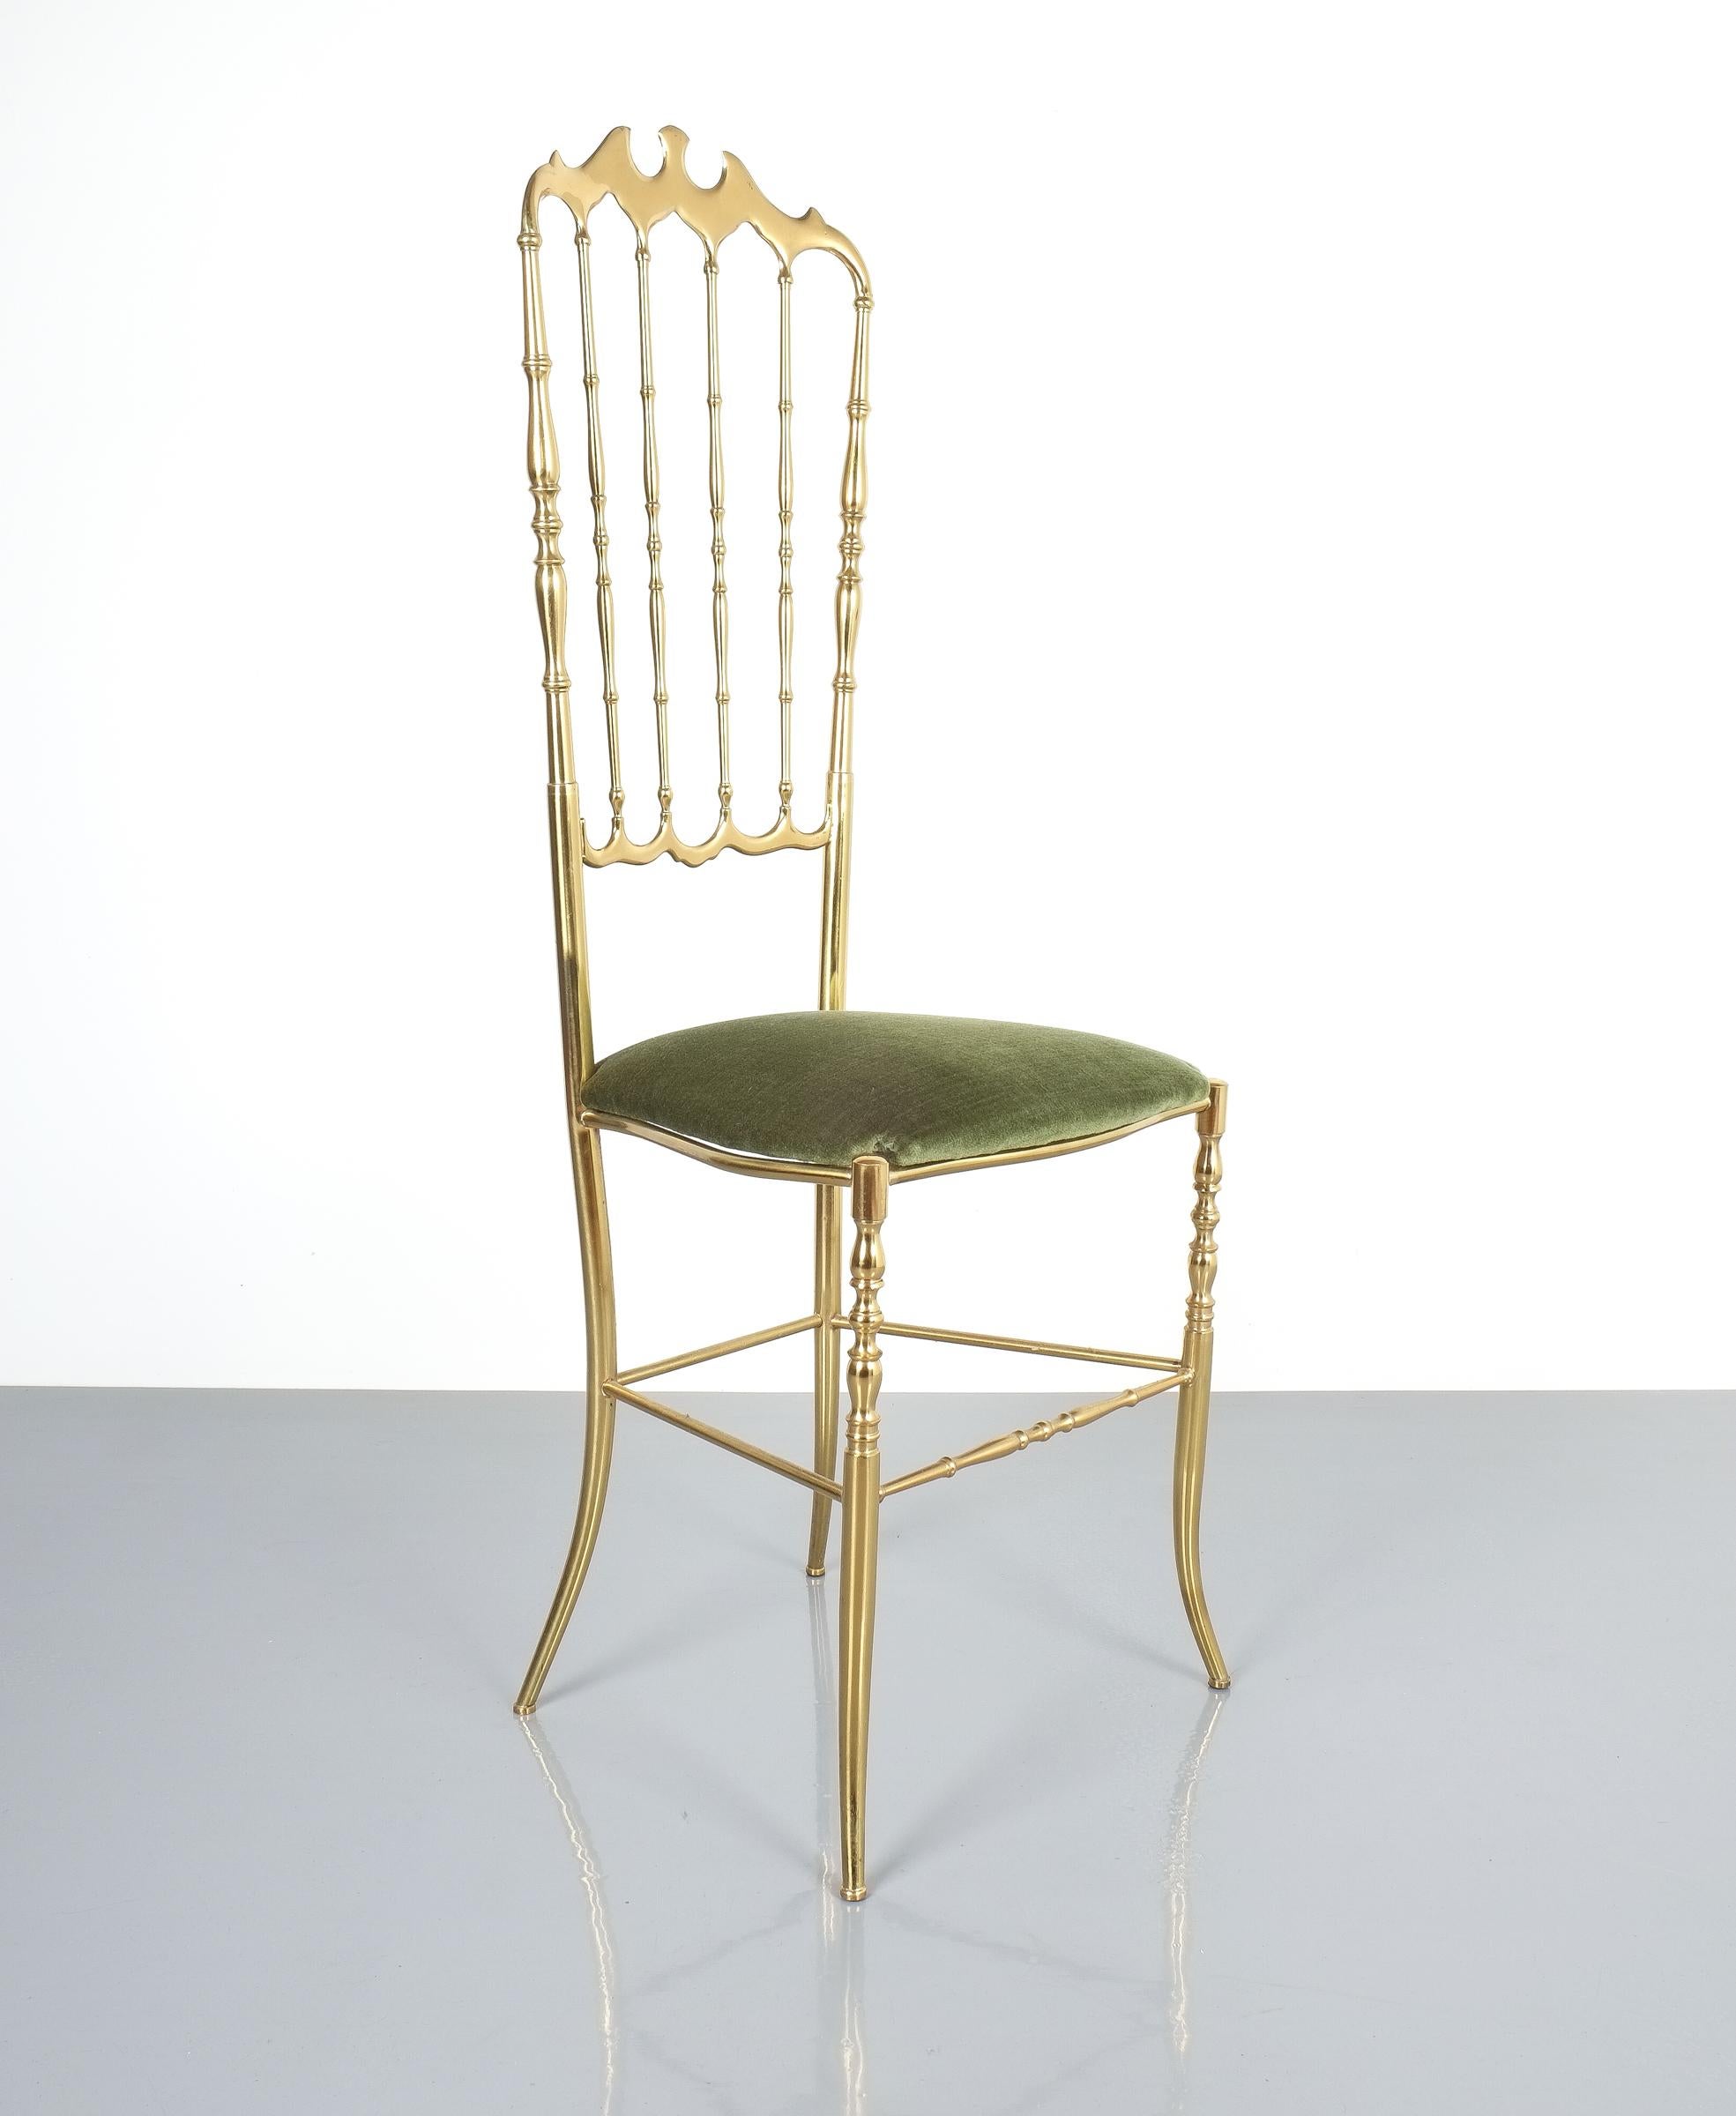 Italian Pair of Polished High Back Brass Chairs by Chiavari, Italy, 1950